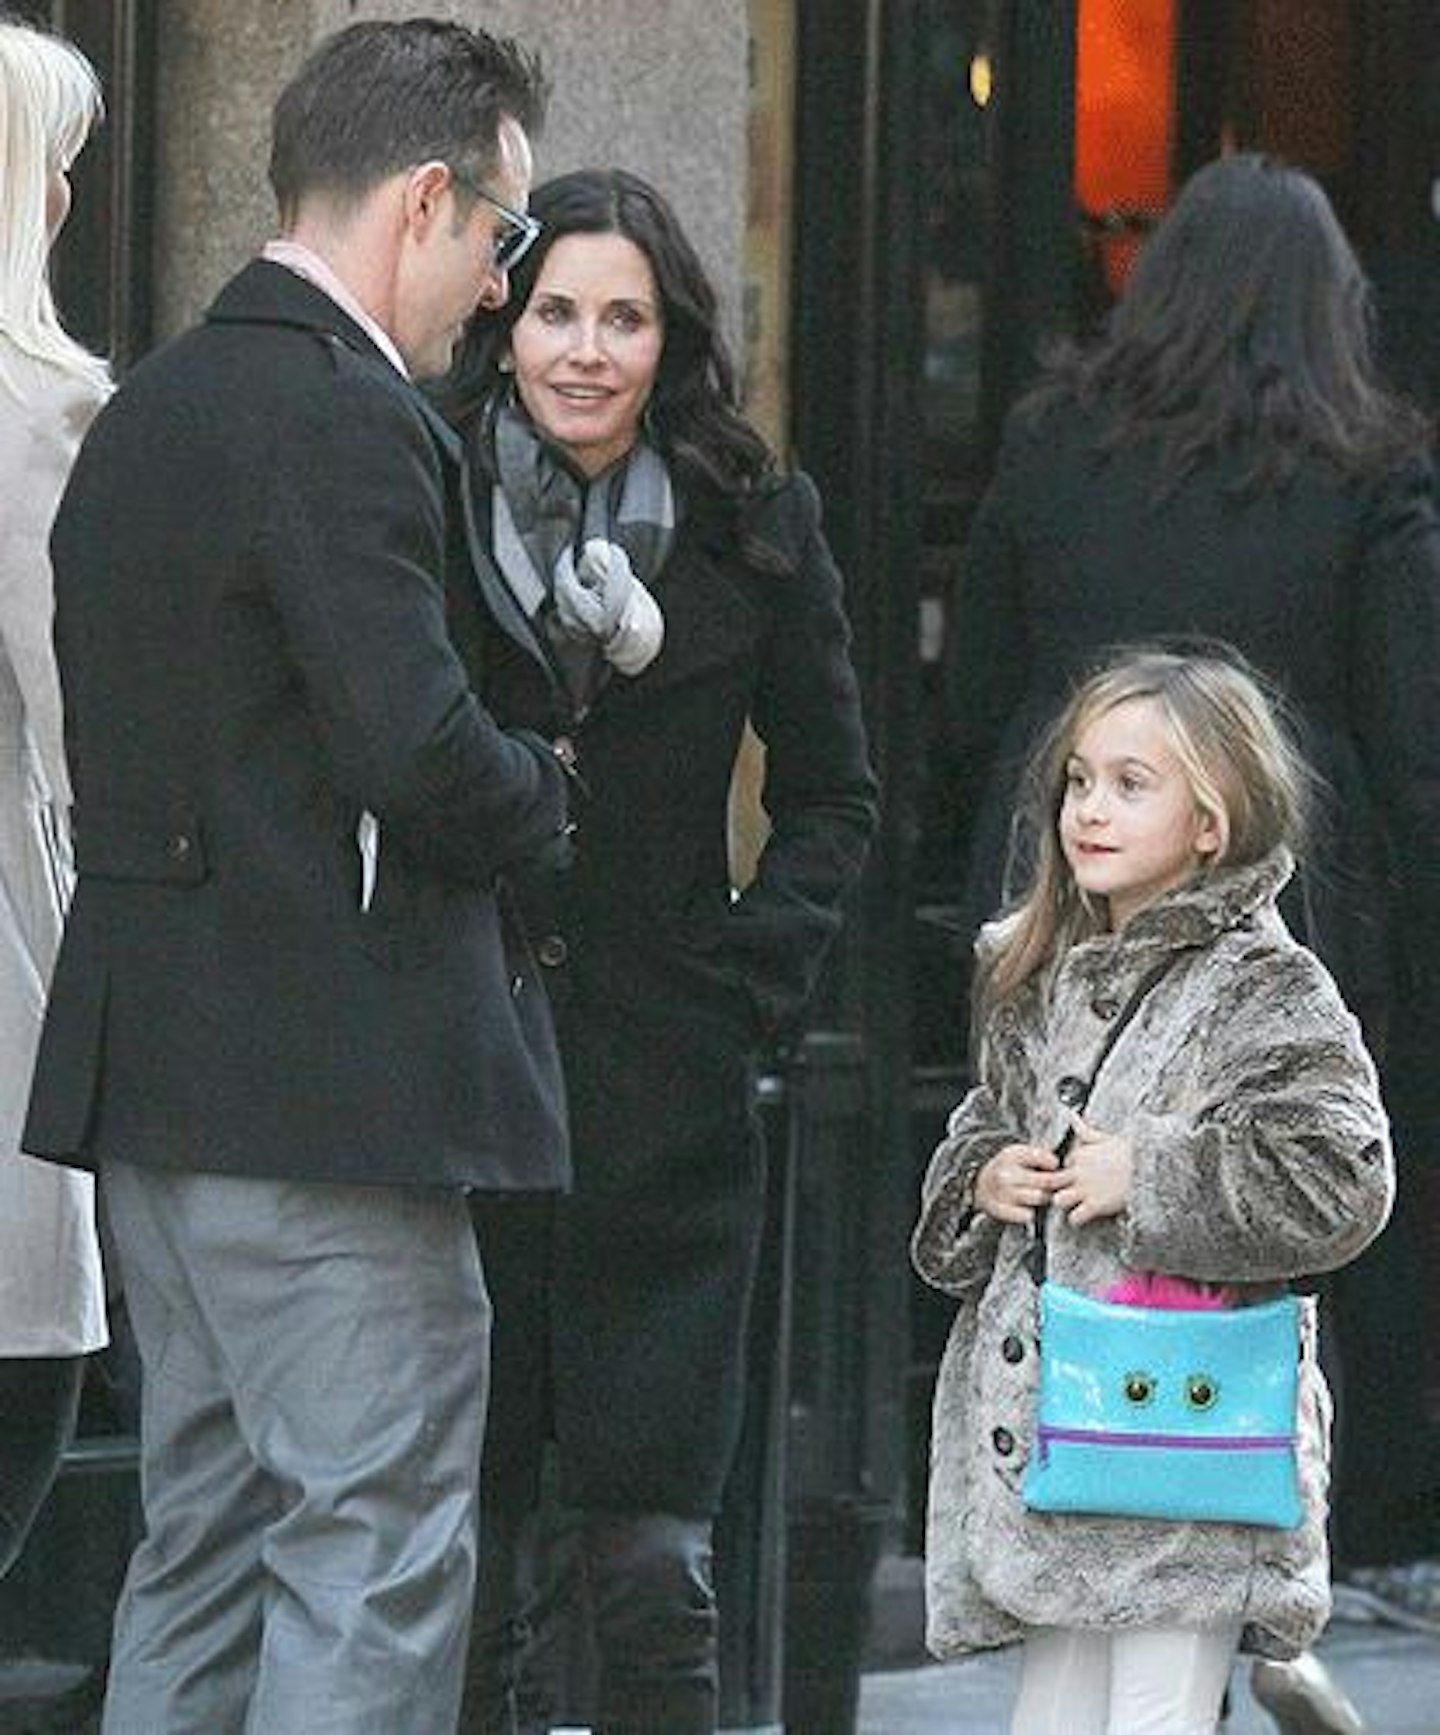 Courtney Cox and David Arquette with daughter Coco